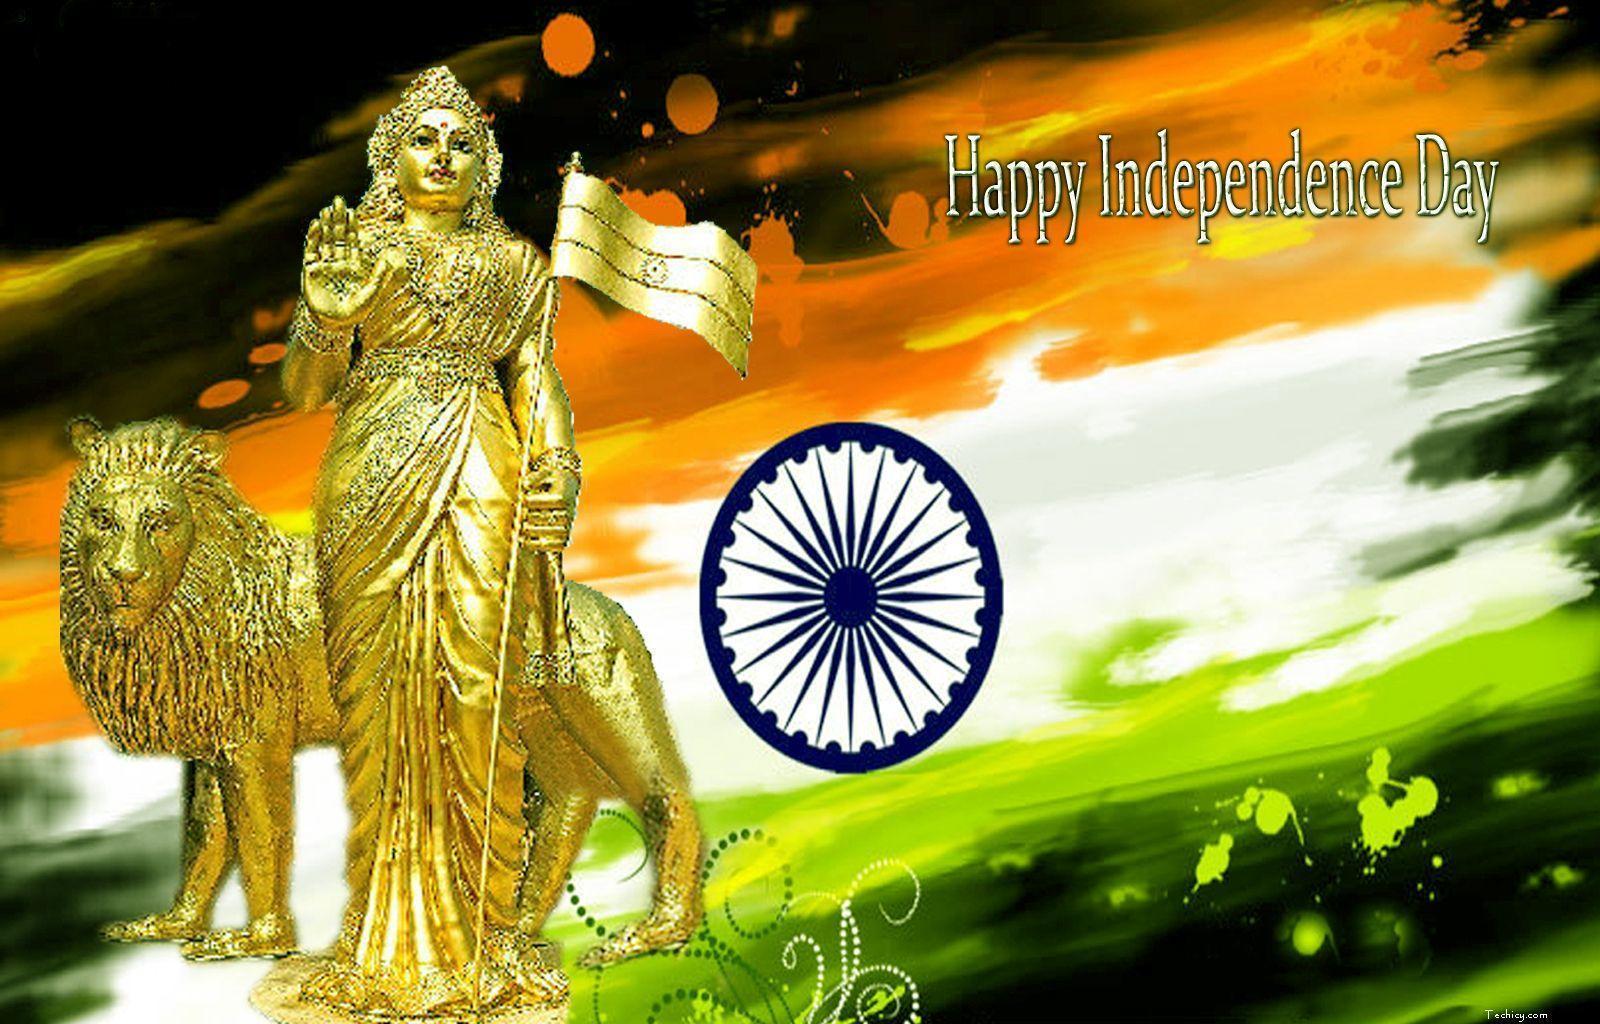 Aug India Independence Day HD Image, Wallpaper, Picture